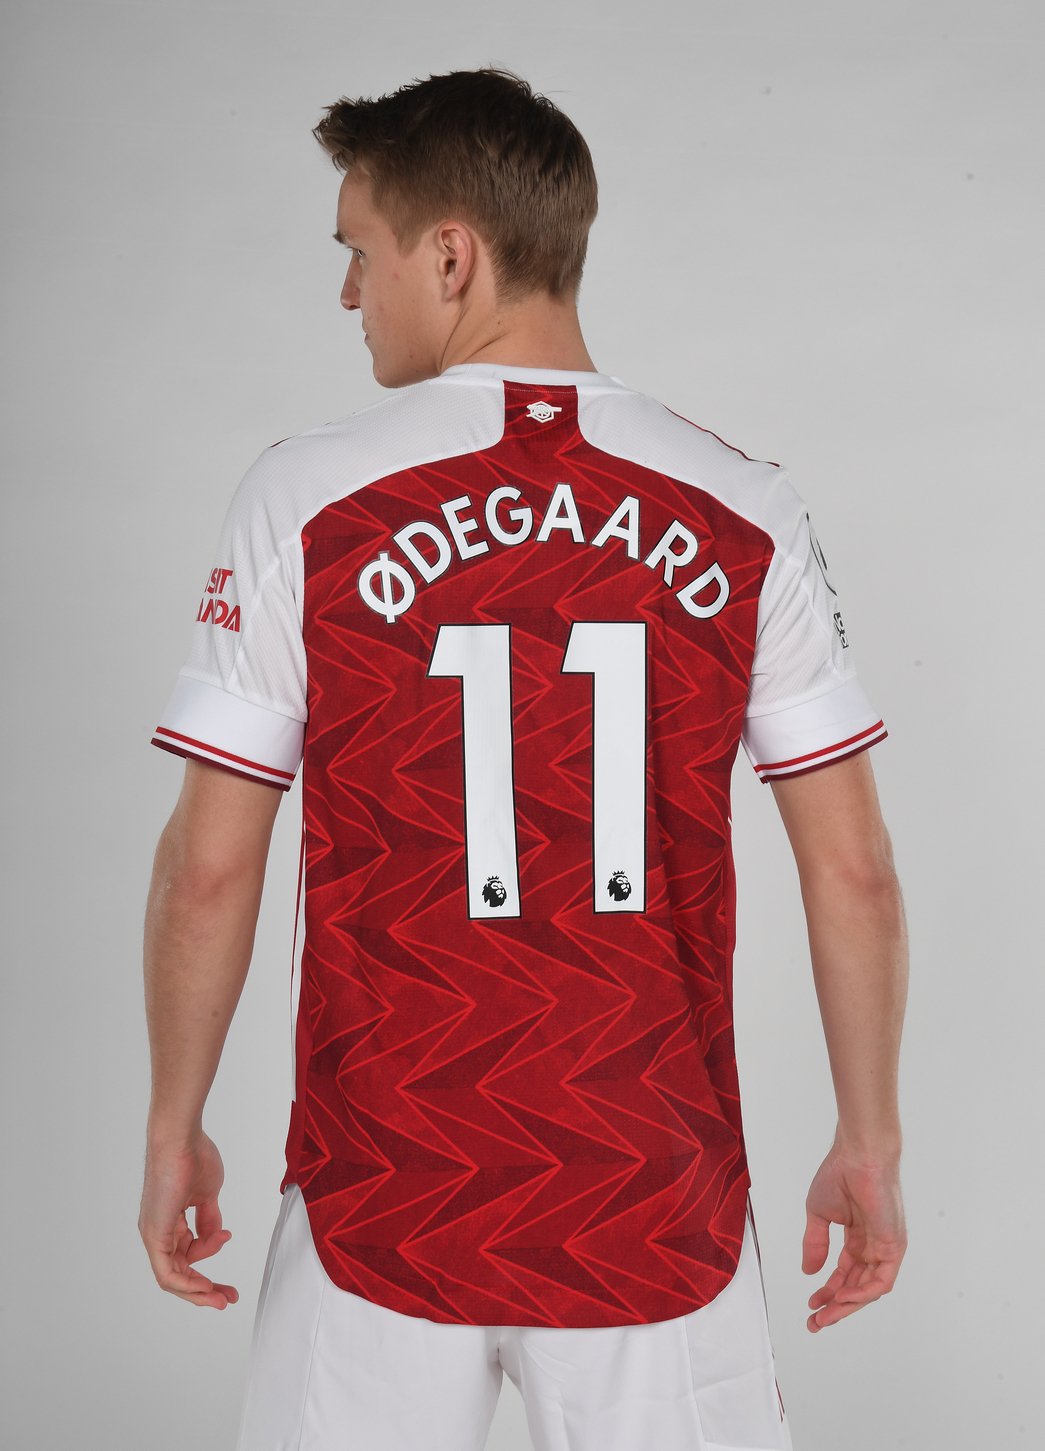 [Photos] Martin Odegaard poses in Arsenal kit after completing move